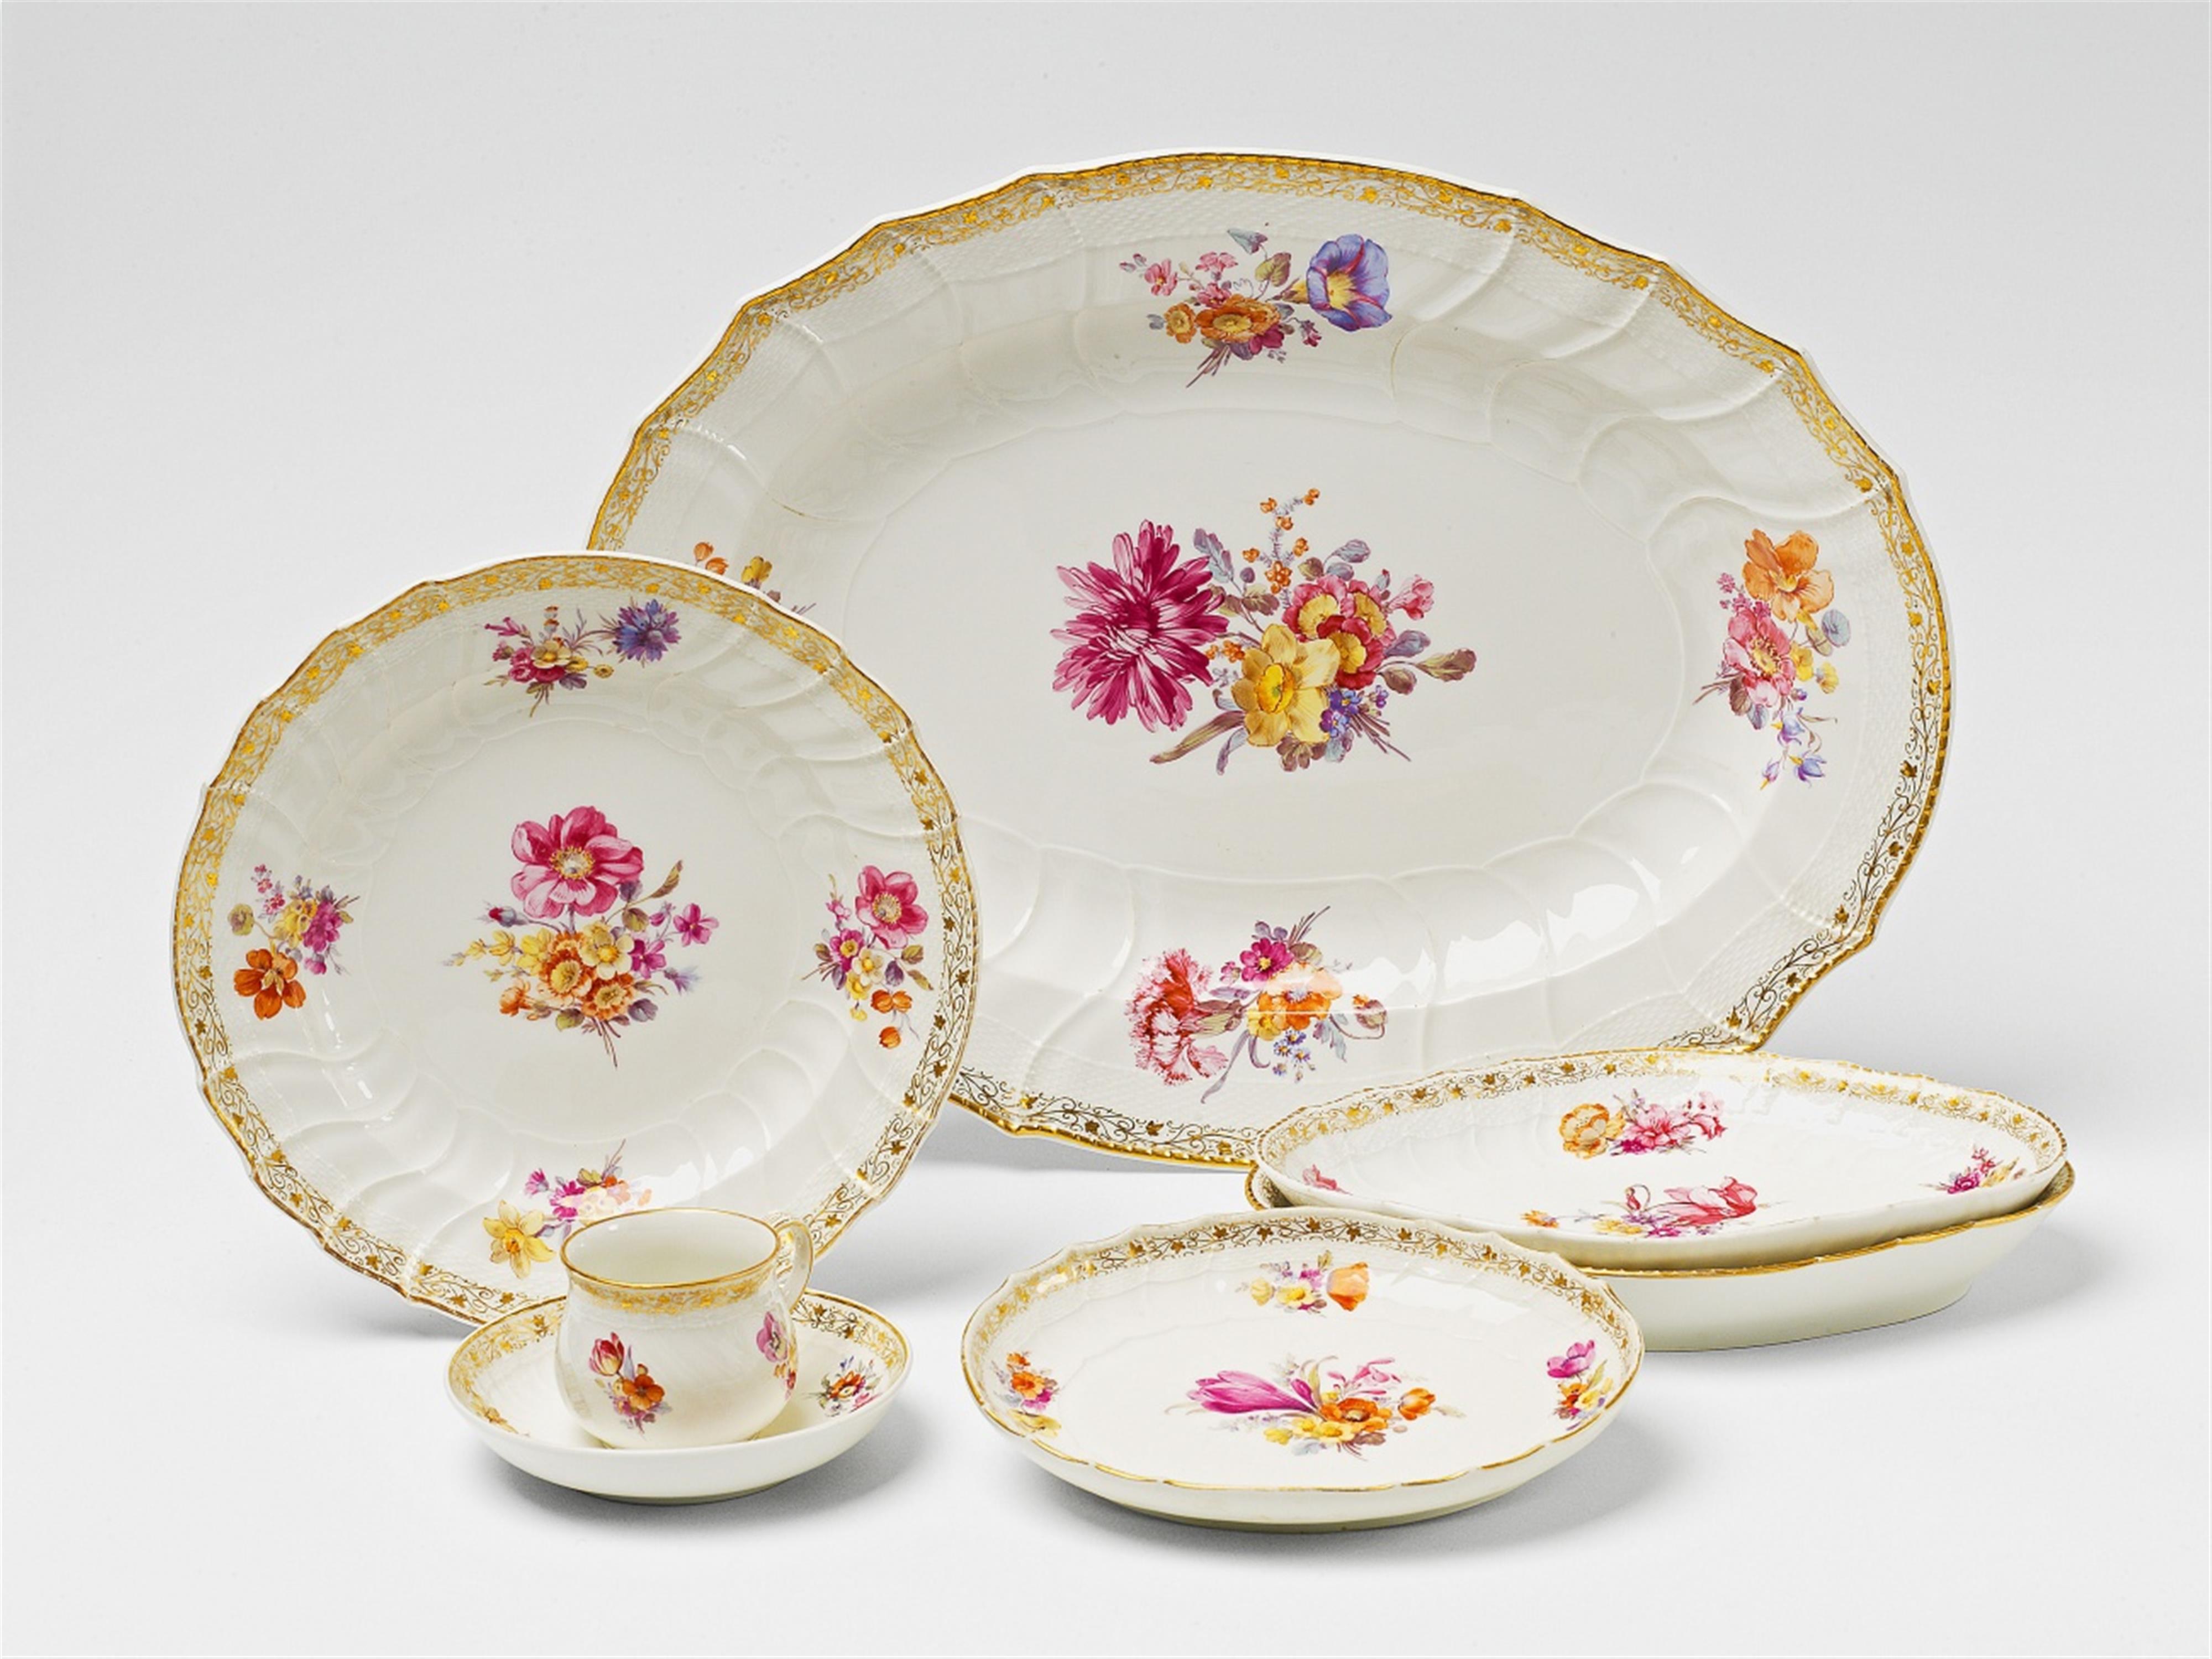 Seven pieces from a Berlin KPM porcelain dinner service made for Emperor William II - image-1